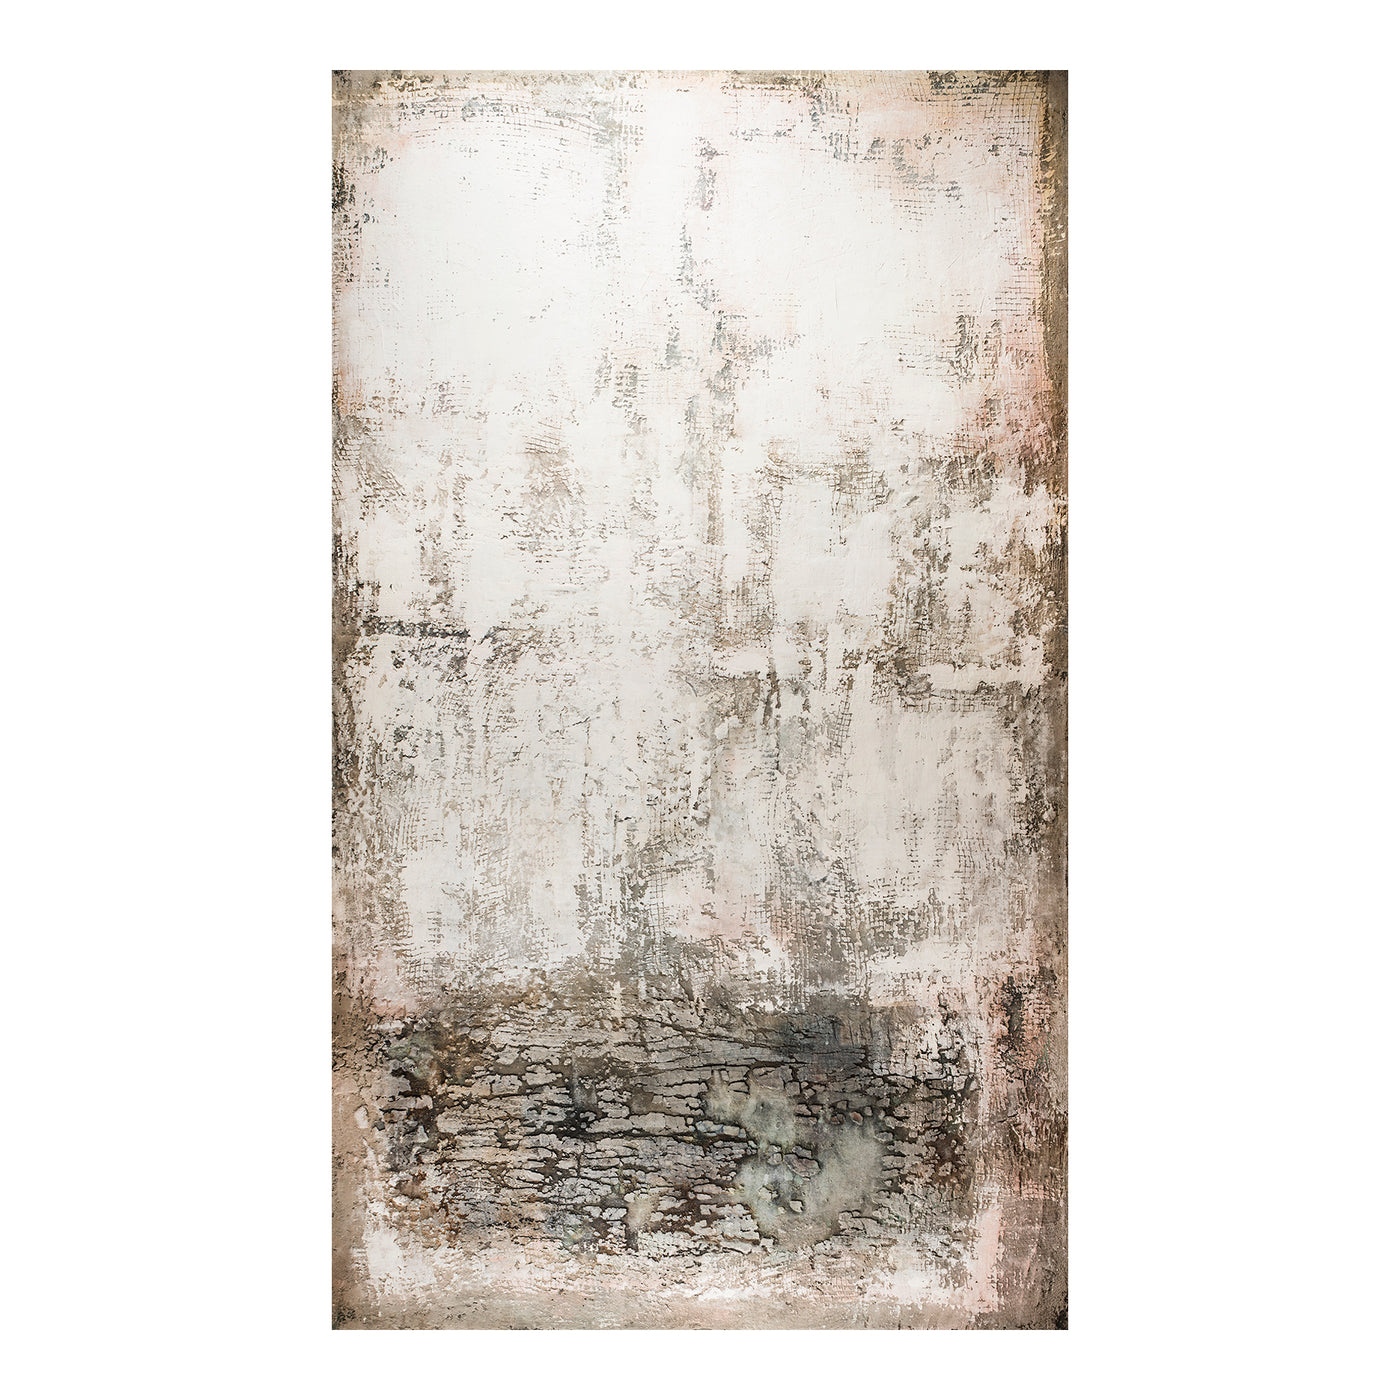 The Existence wall decor provides an an abstract and earthy vibe that brings your room together. This quality oil on canva...